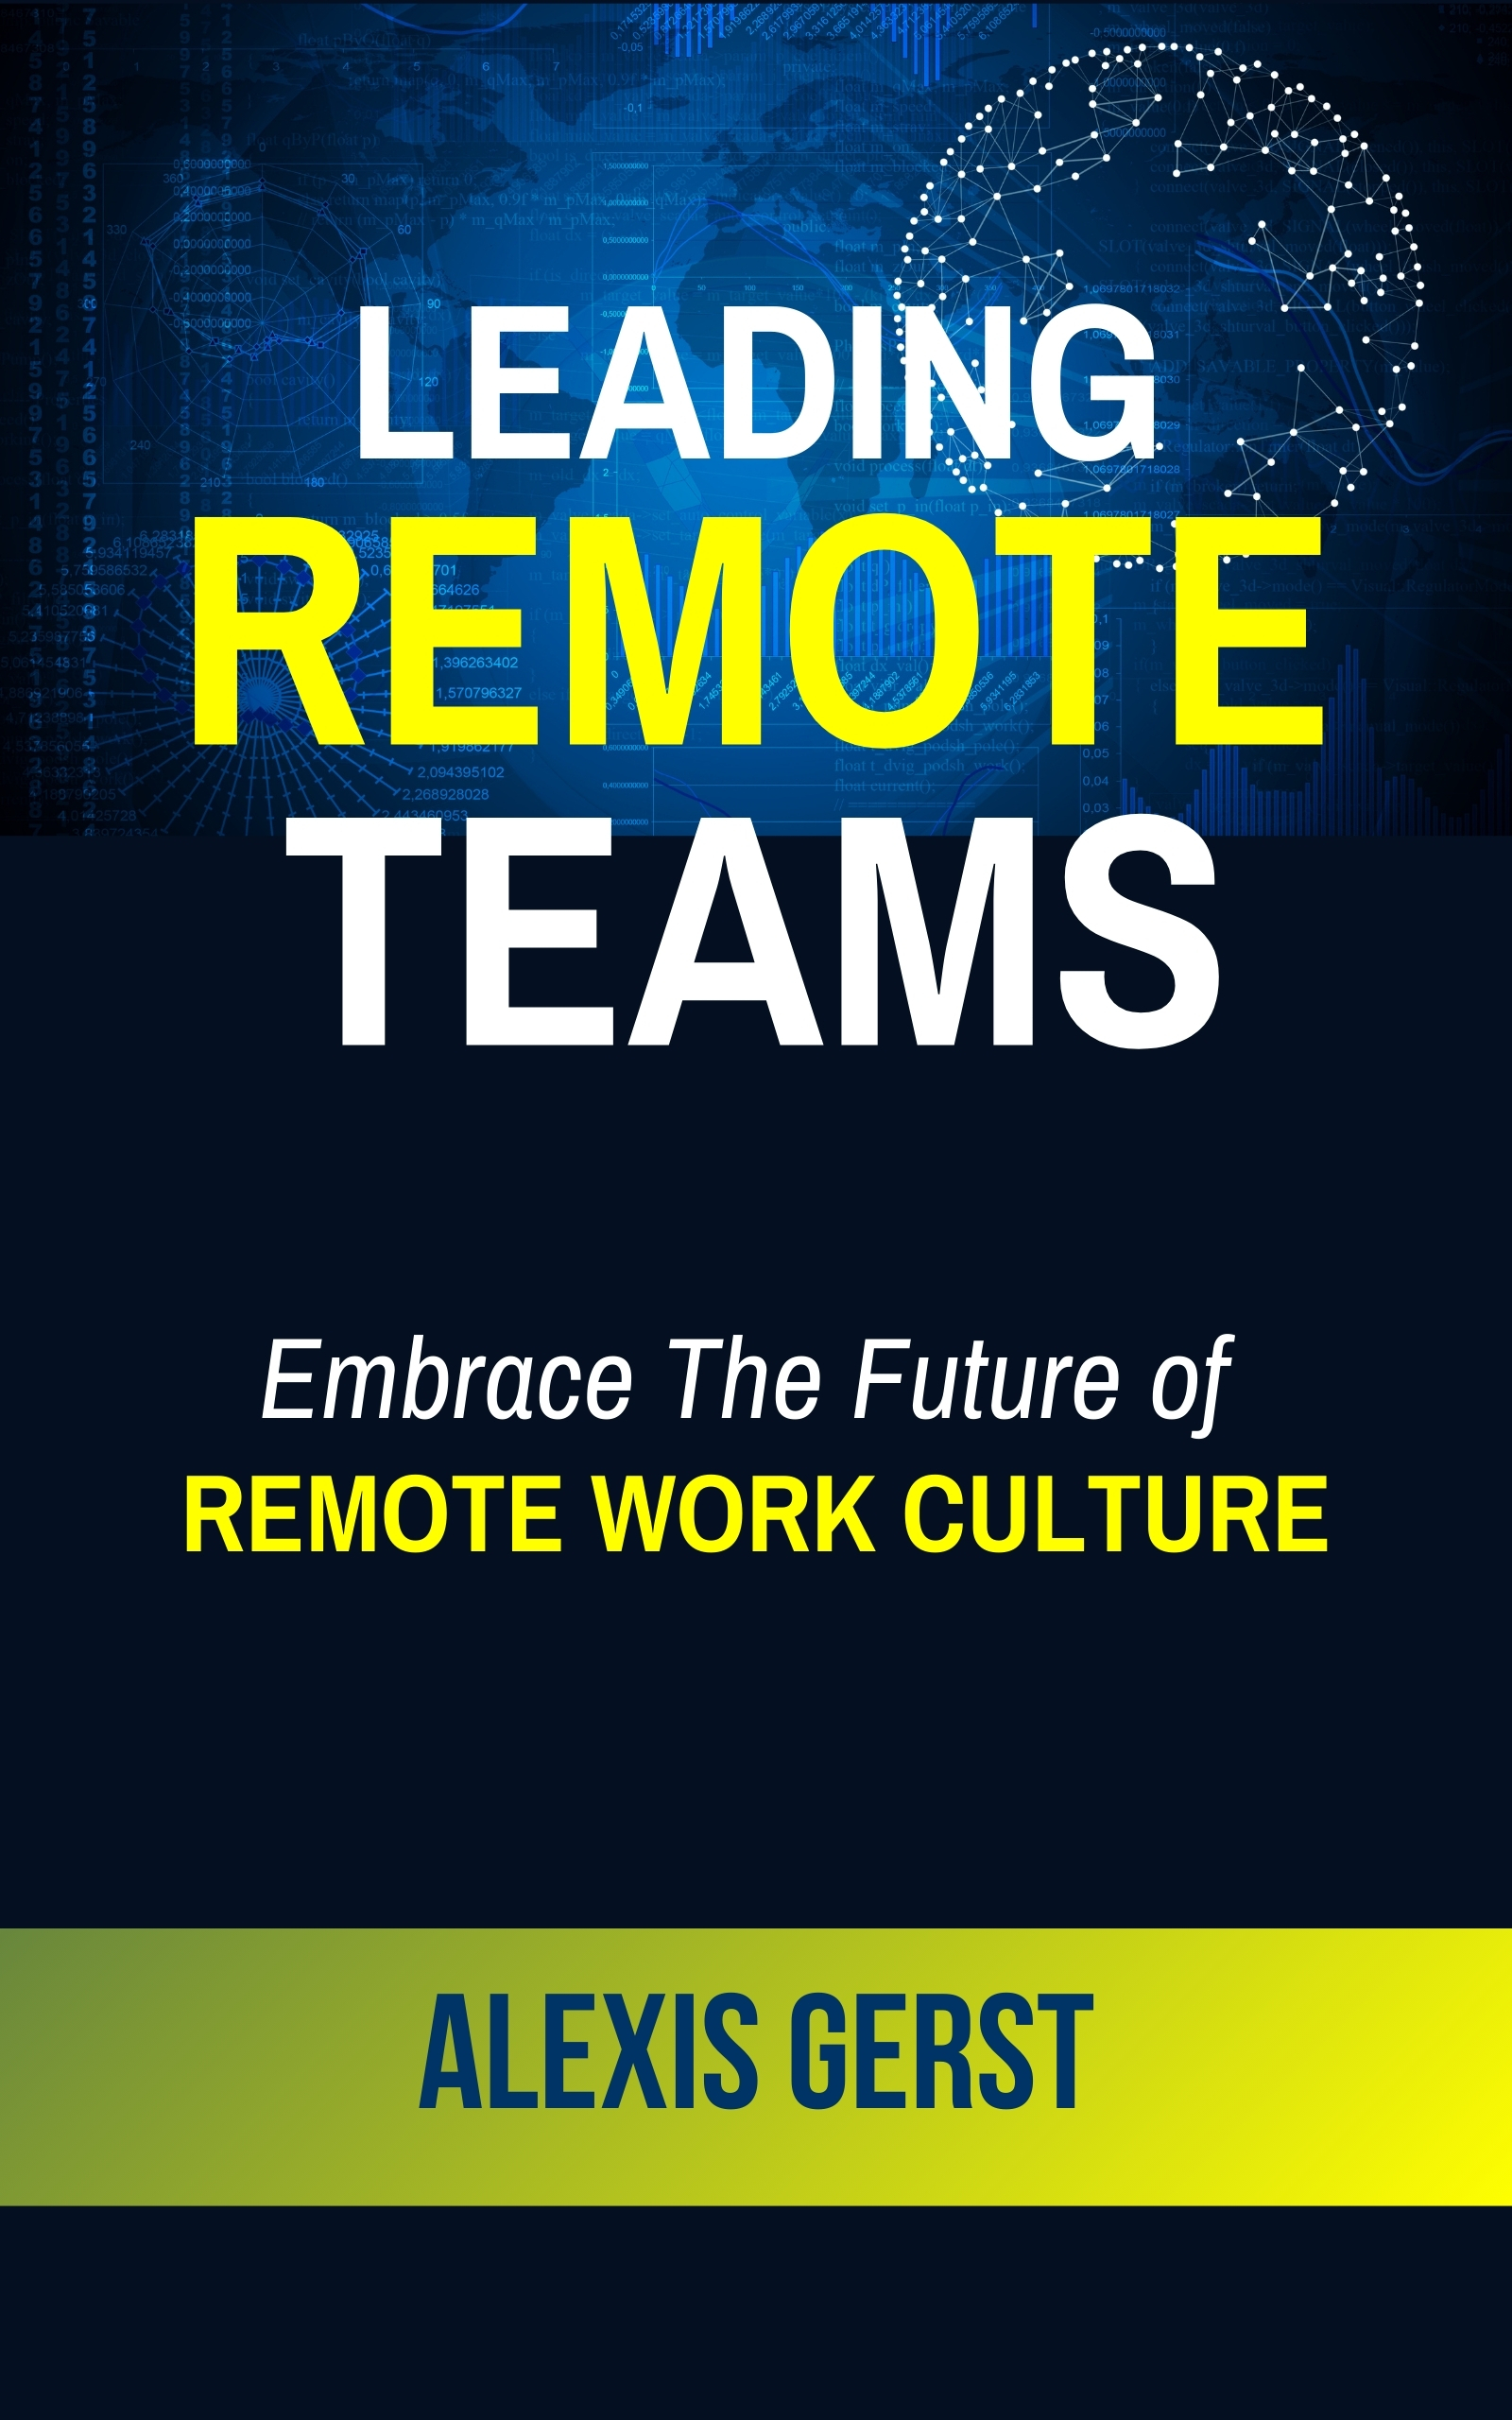 FREE: Leading Remote Teams: Embrace the Future of Remote Work Culture by Alexis Gerst